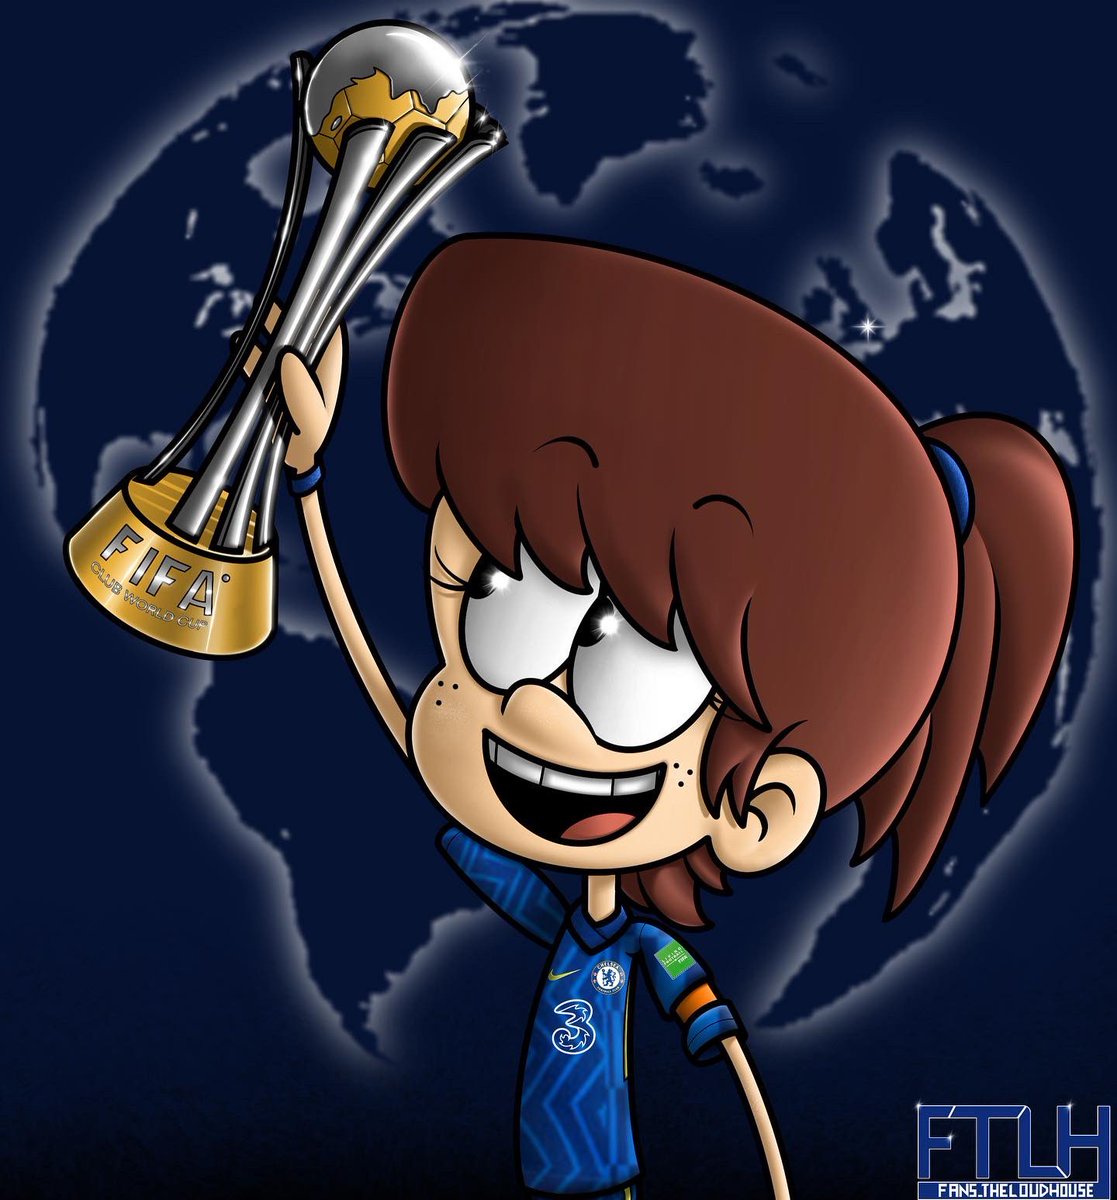 #FTLH We Are The Champions of World! 🌍🏆 @ChelseaFC 💙
The World is BLUE!!! 🌍=🔵😌

UP THE CHELS! 💙

#TheLoudHouse #LynnLoud #myart #fanart #Nickelodeon #ChelseaFC #ChampionsOfTheWorld